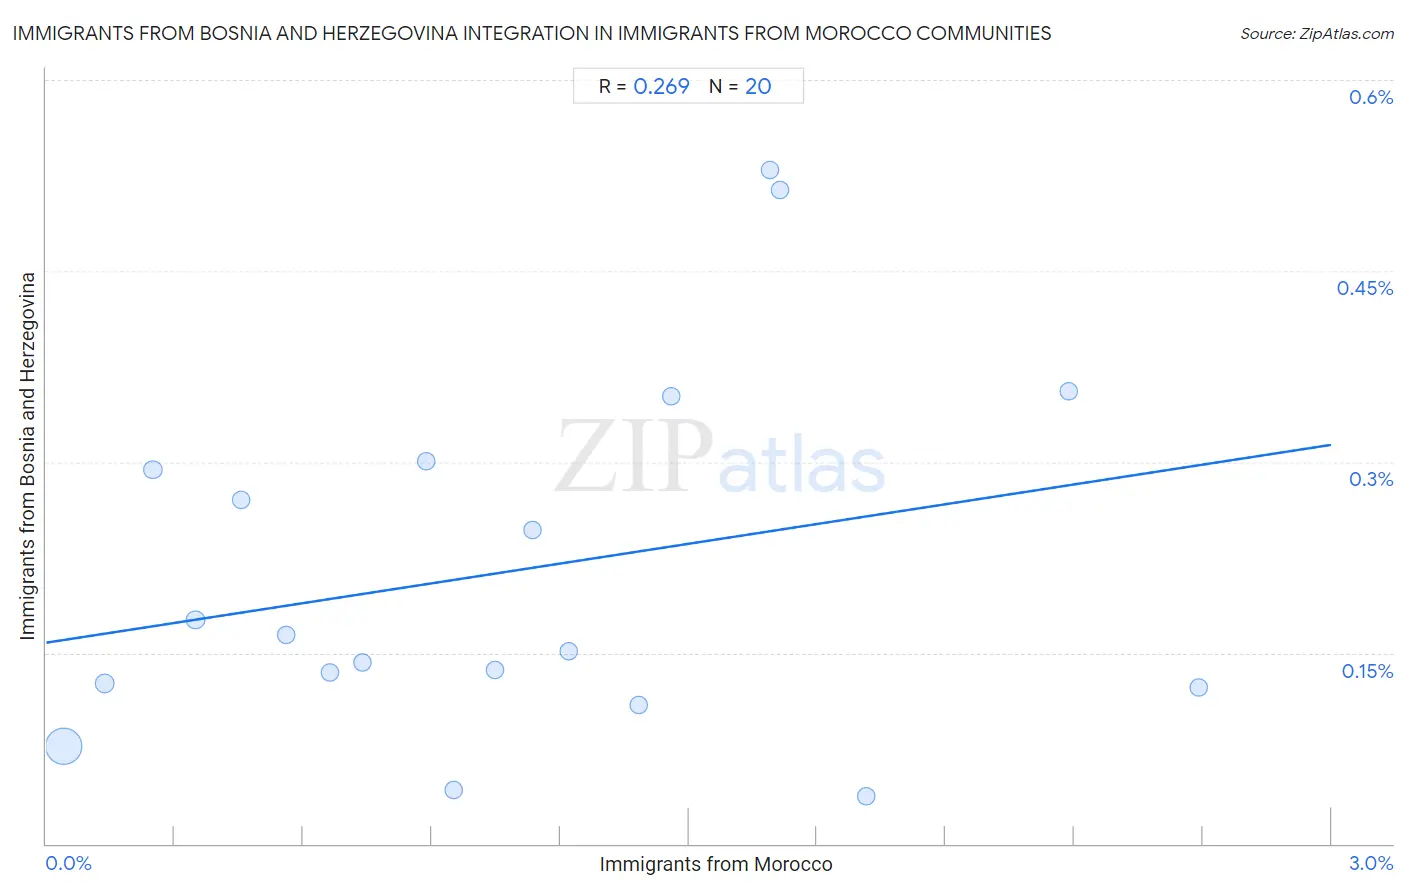 Immigrants from Morocco Integration in Immigrants from Bosnia and Herzegovina Communities